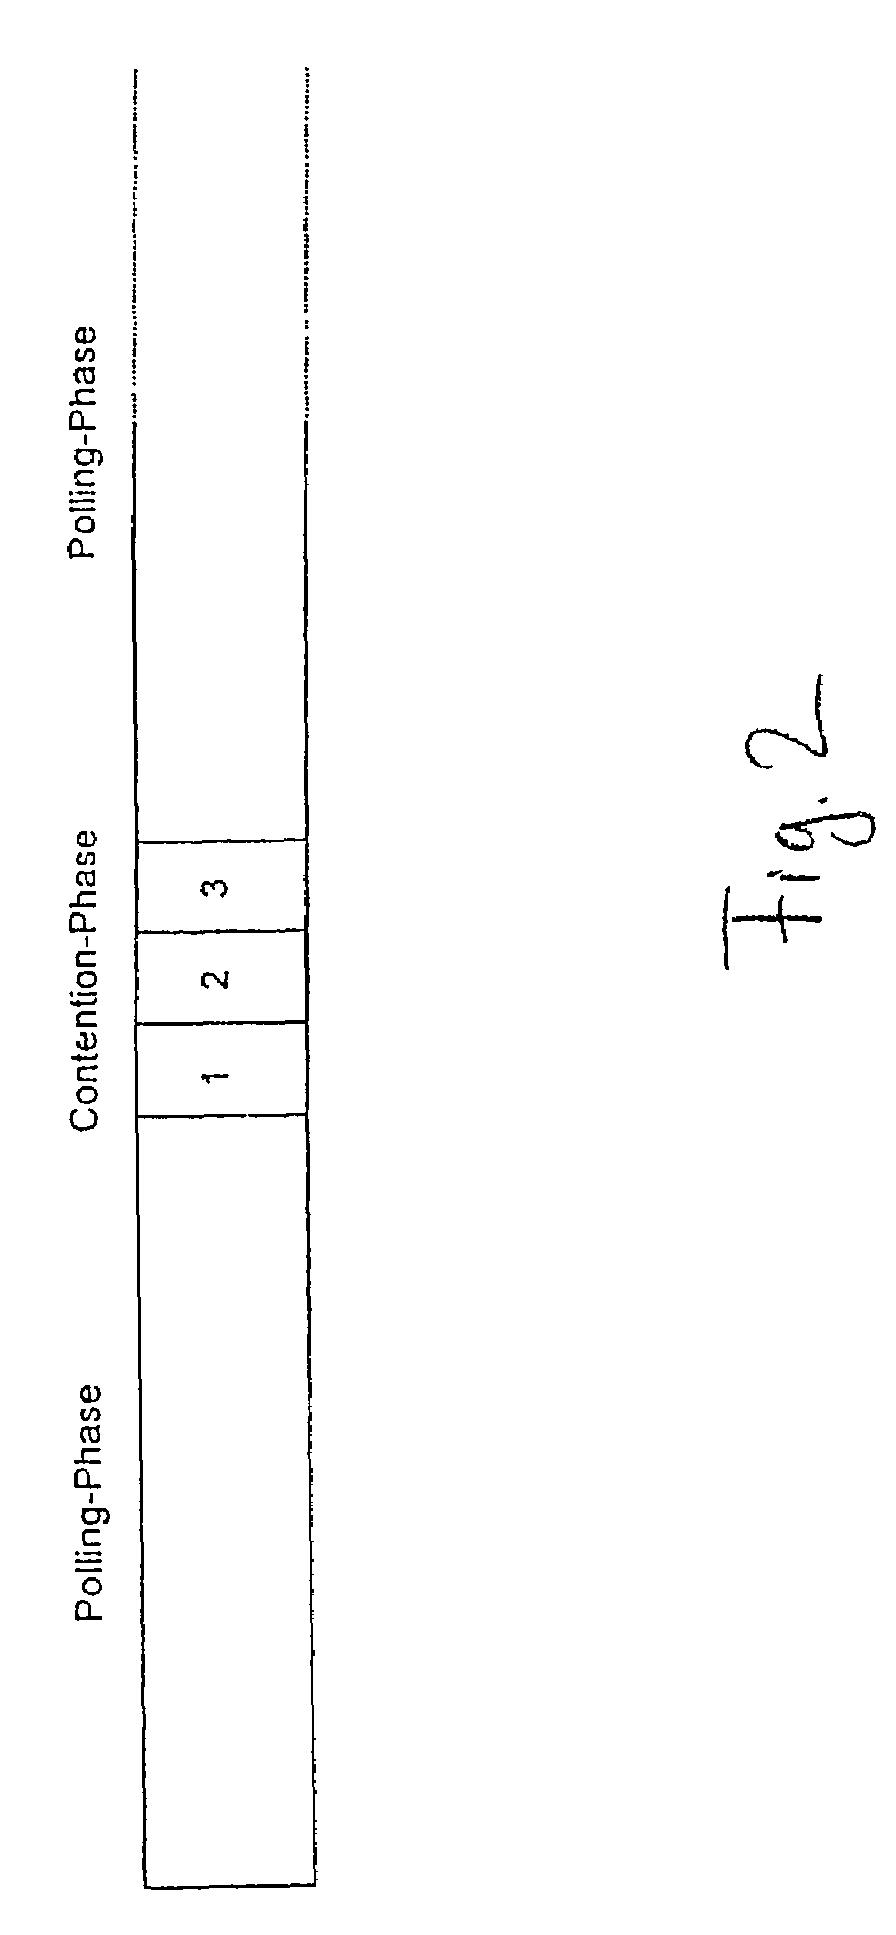 Electronic system with a multiple access protocol and method of multiple access